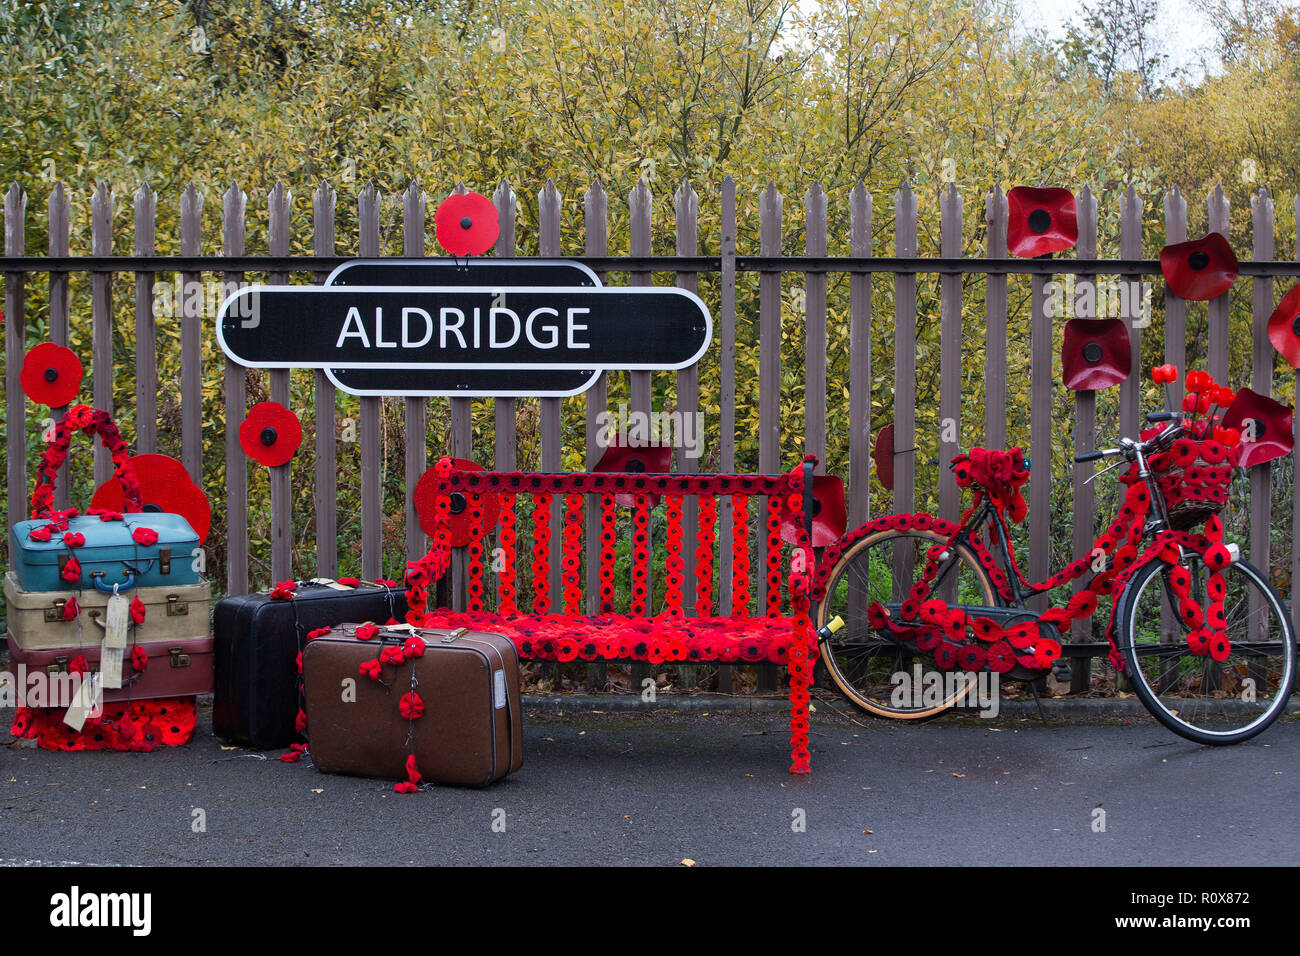 A sign in Station Road, Aldridge in Walsall which has transformed itself into Poppy Road as almost 100 houses have been decorated with 24,000 red poppies and silhouette statues of soldiers to honour local people who endured and lost their lives in the First World War. Stock Photo